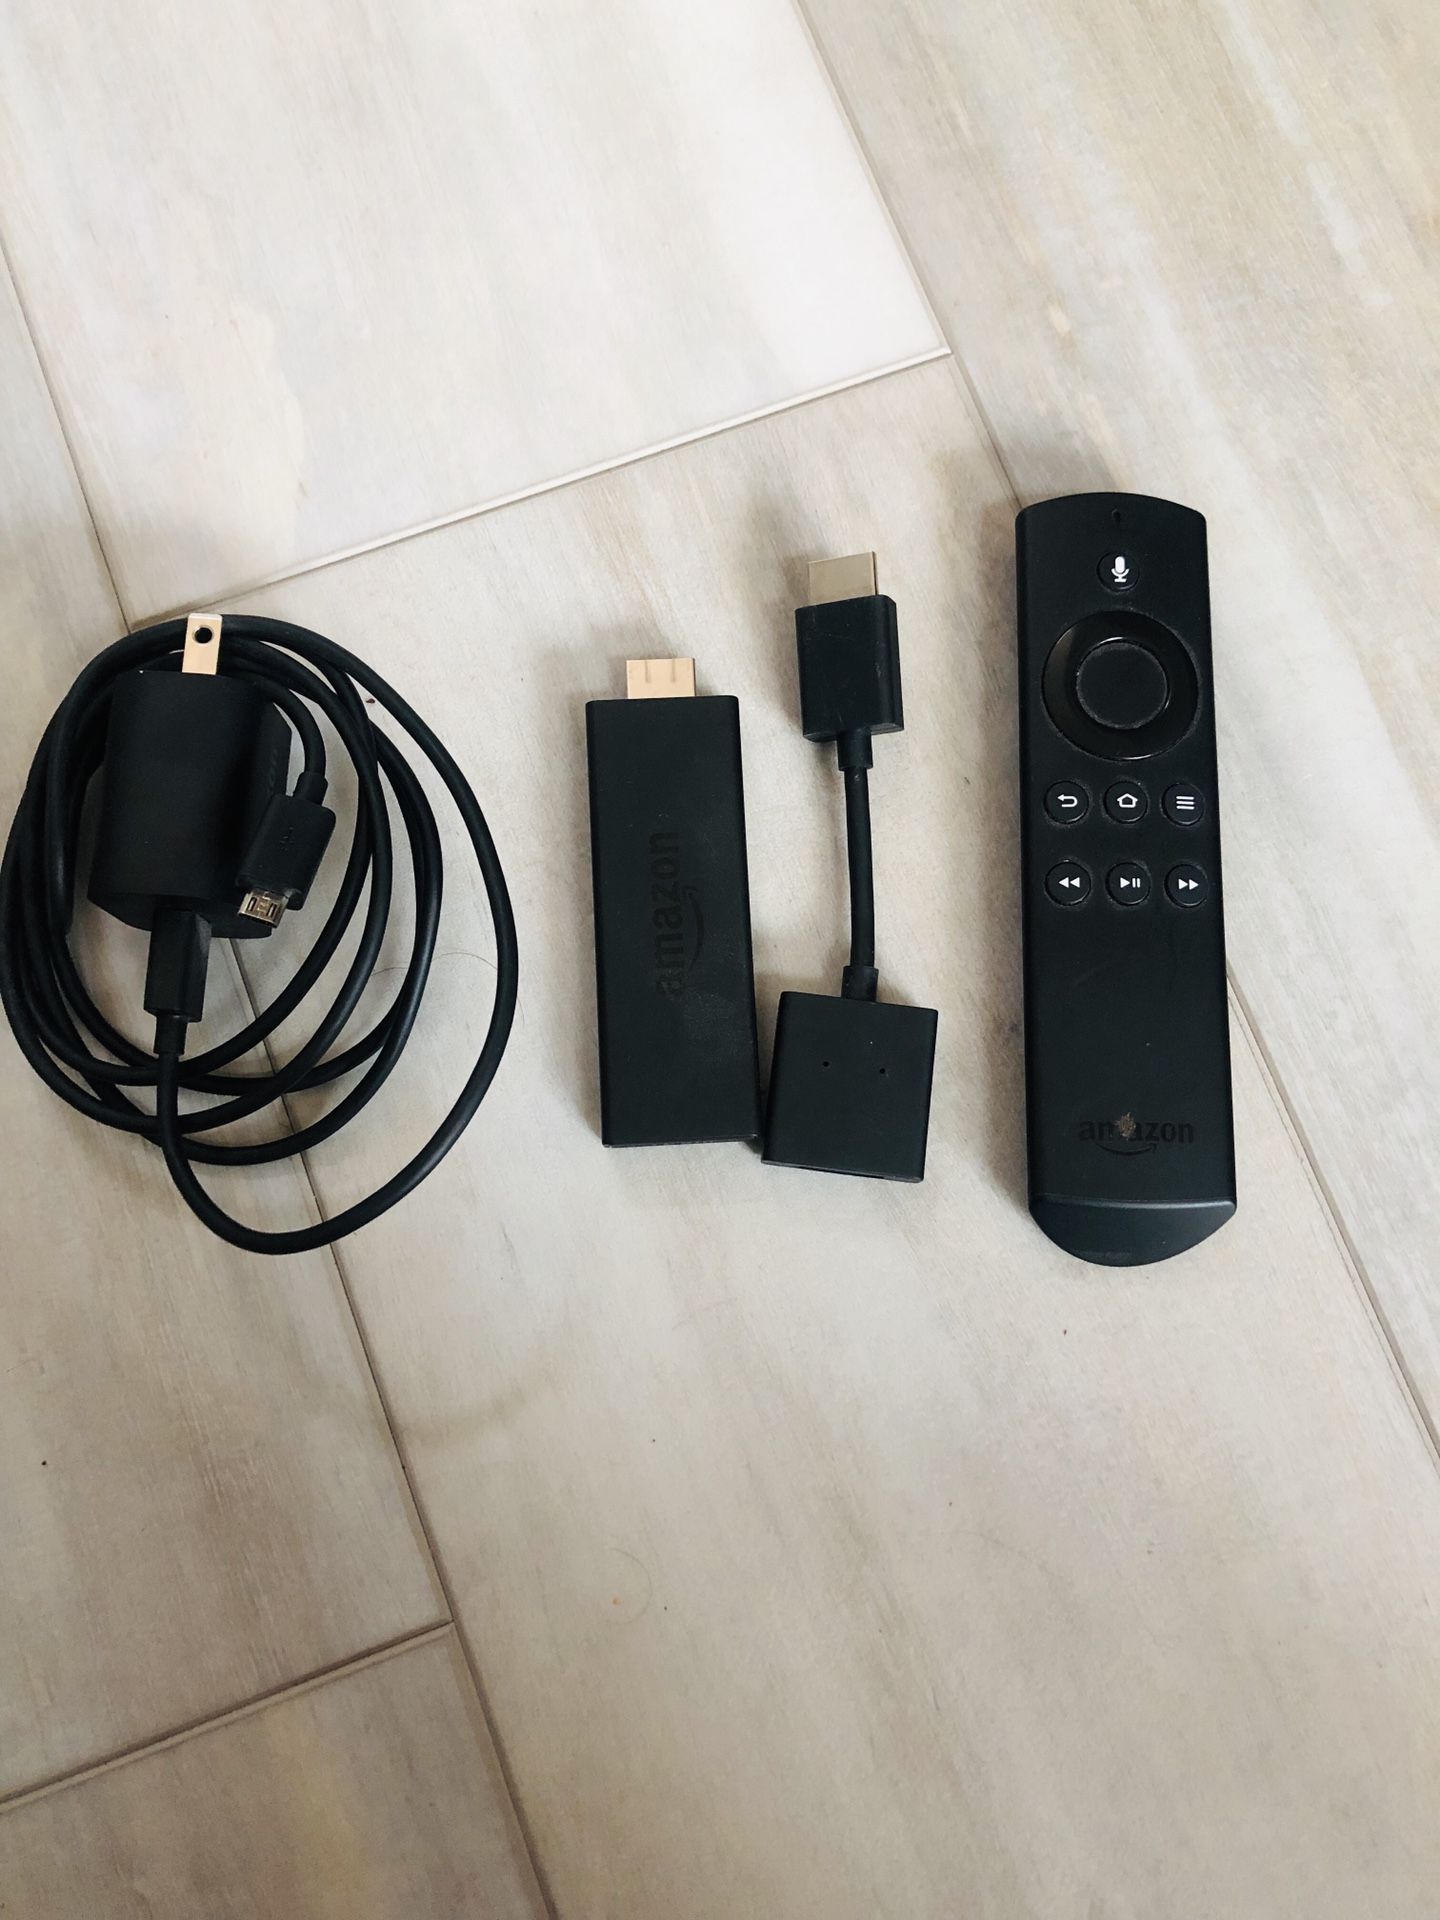 Amazon Fire TV Stick 2019 All-New Alexa Voice Remote with TV Control Buttons NEW